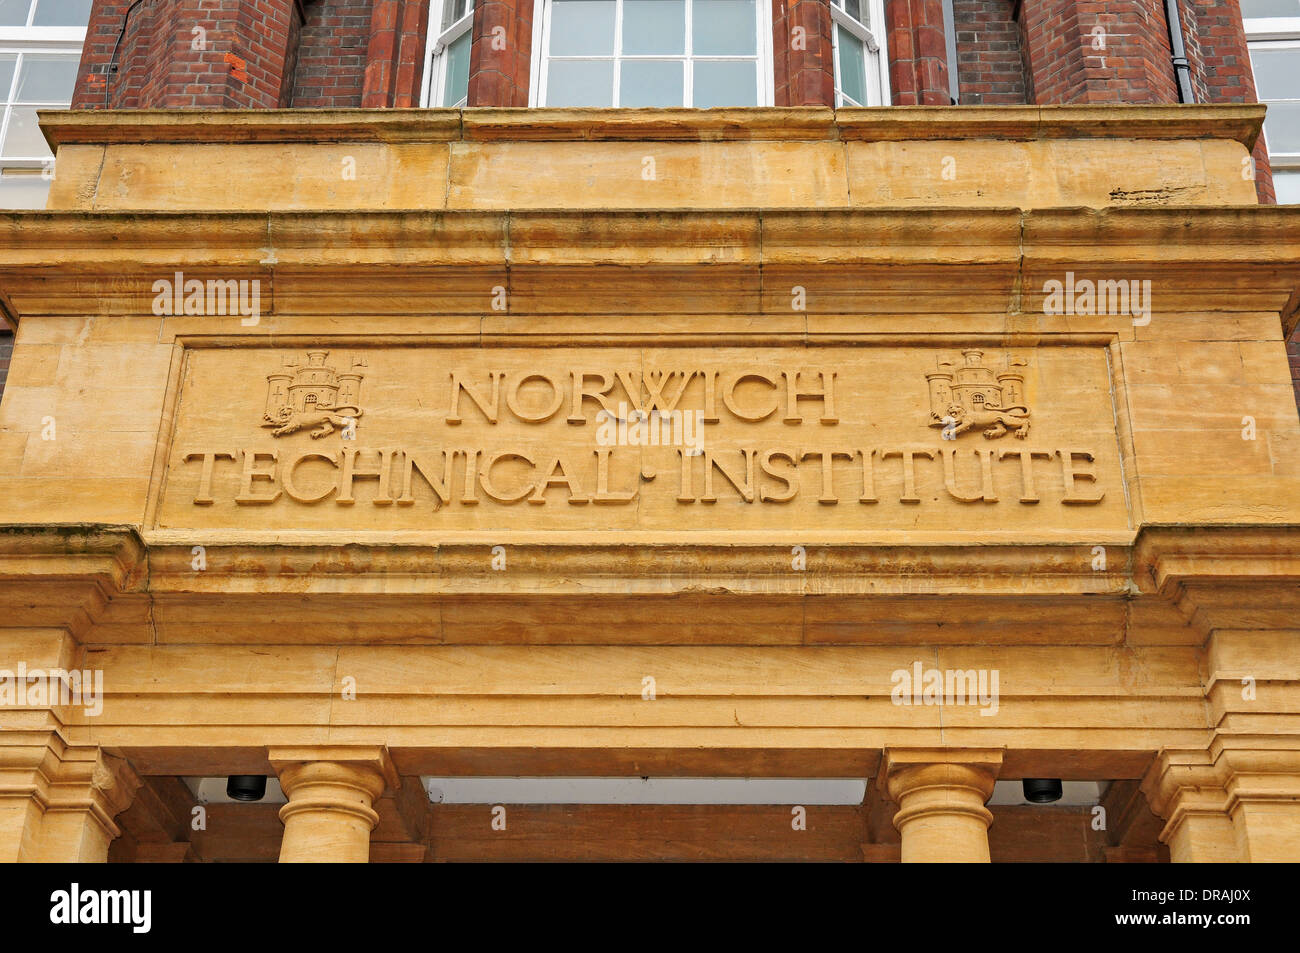 Sculpted sign over the entrance to Norwich Technical Institute. Stock Photo